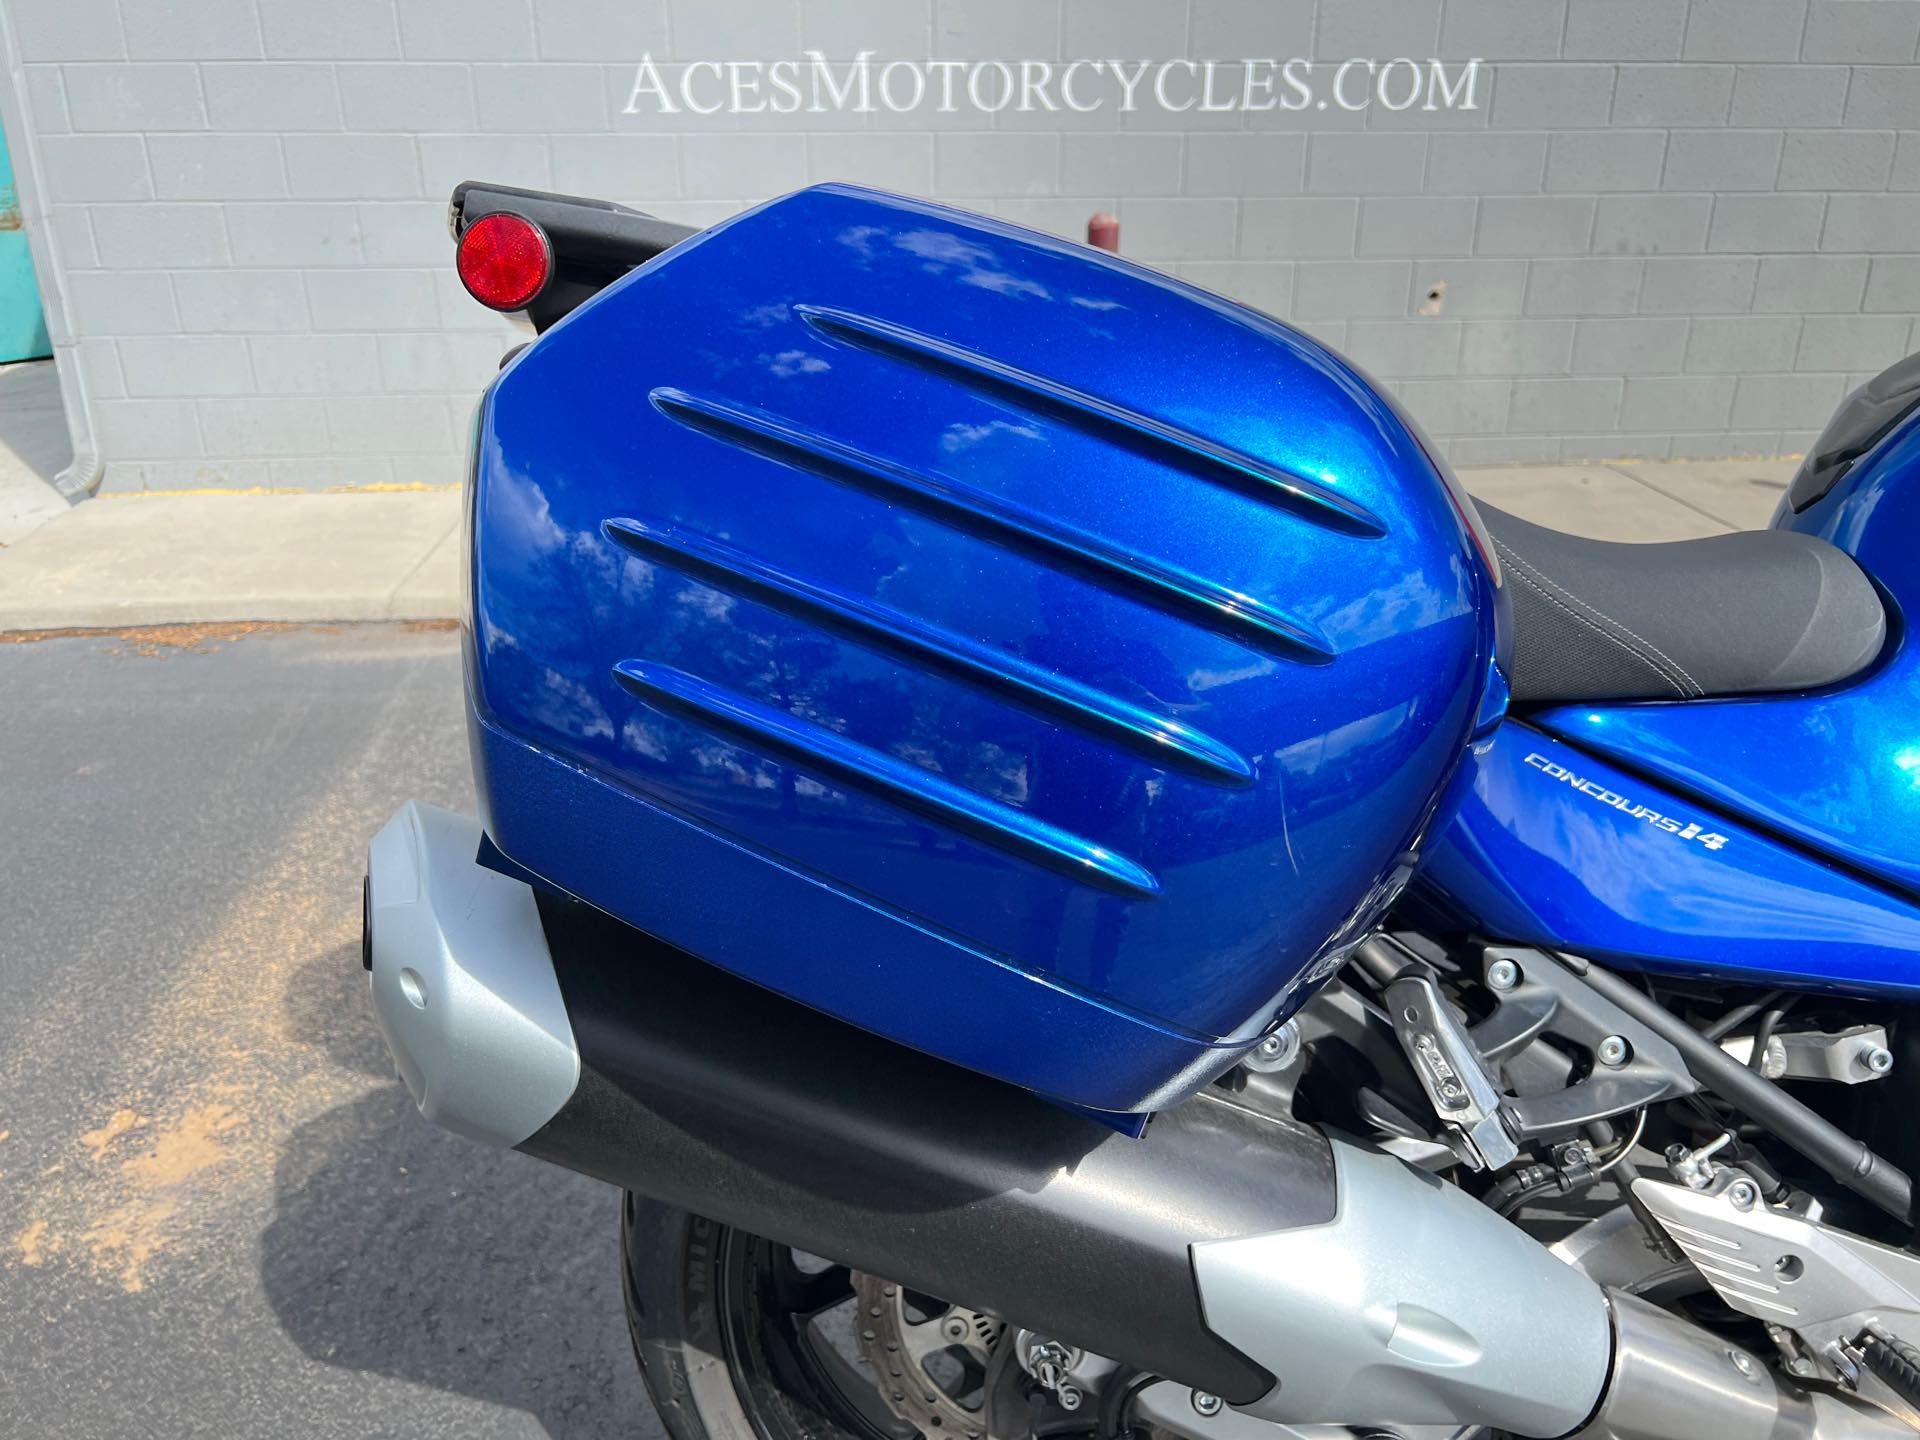 2017 Kawasaki Concours 14 ABS at Aces Motorcycles - Fort Collins